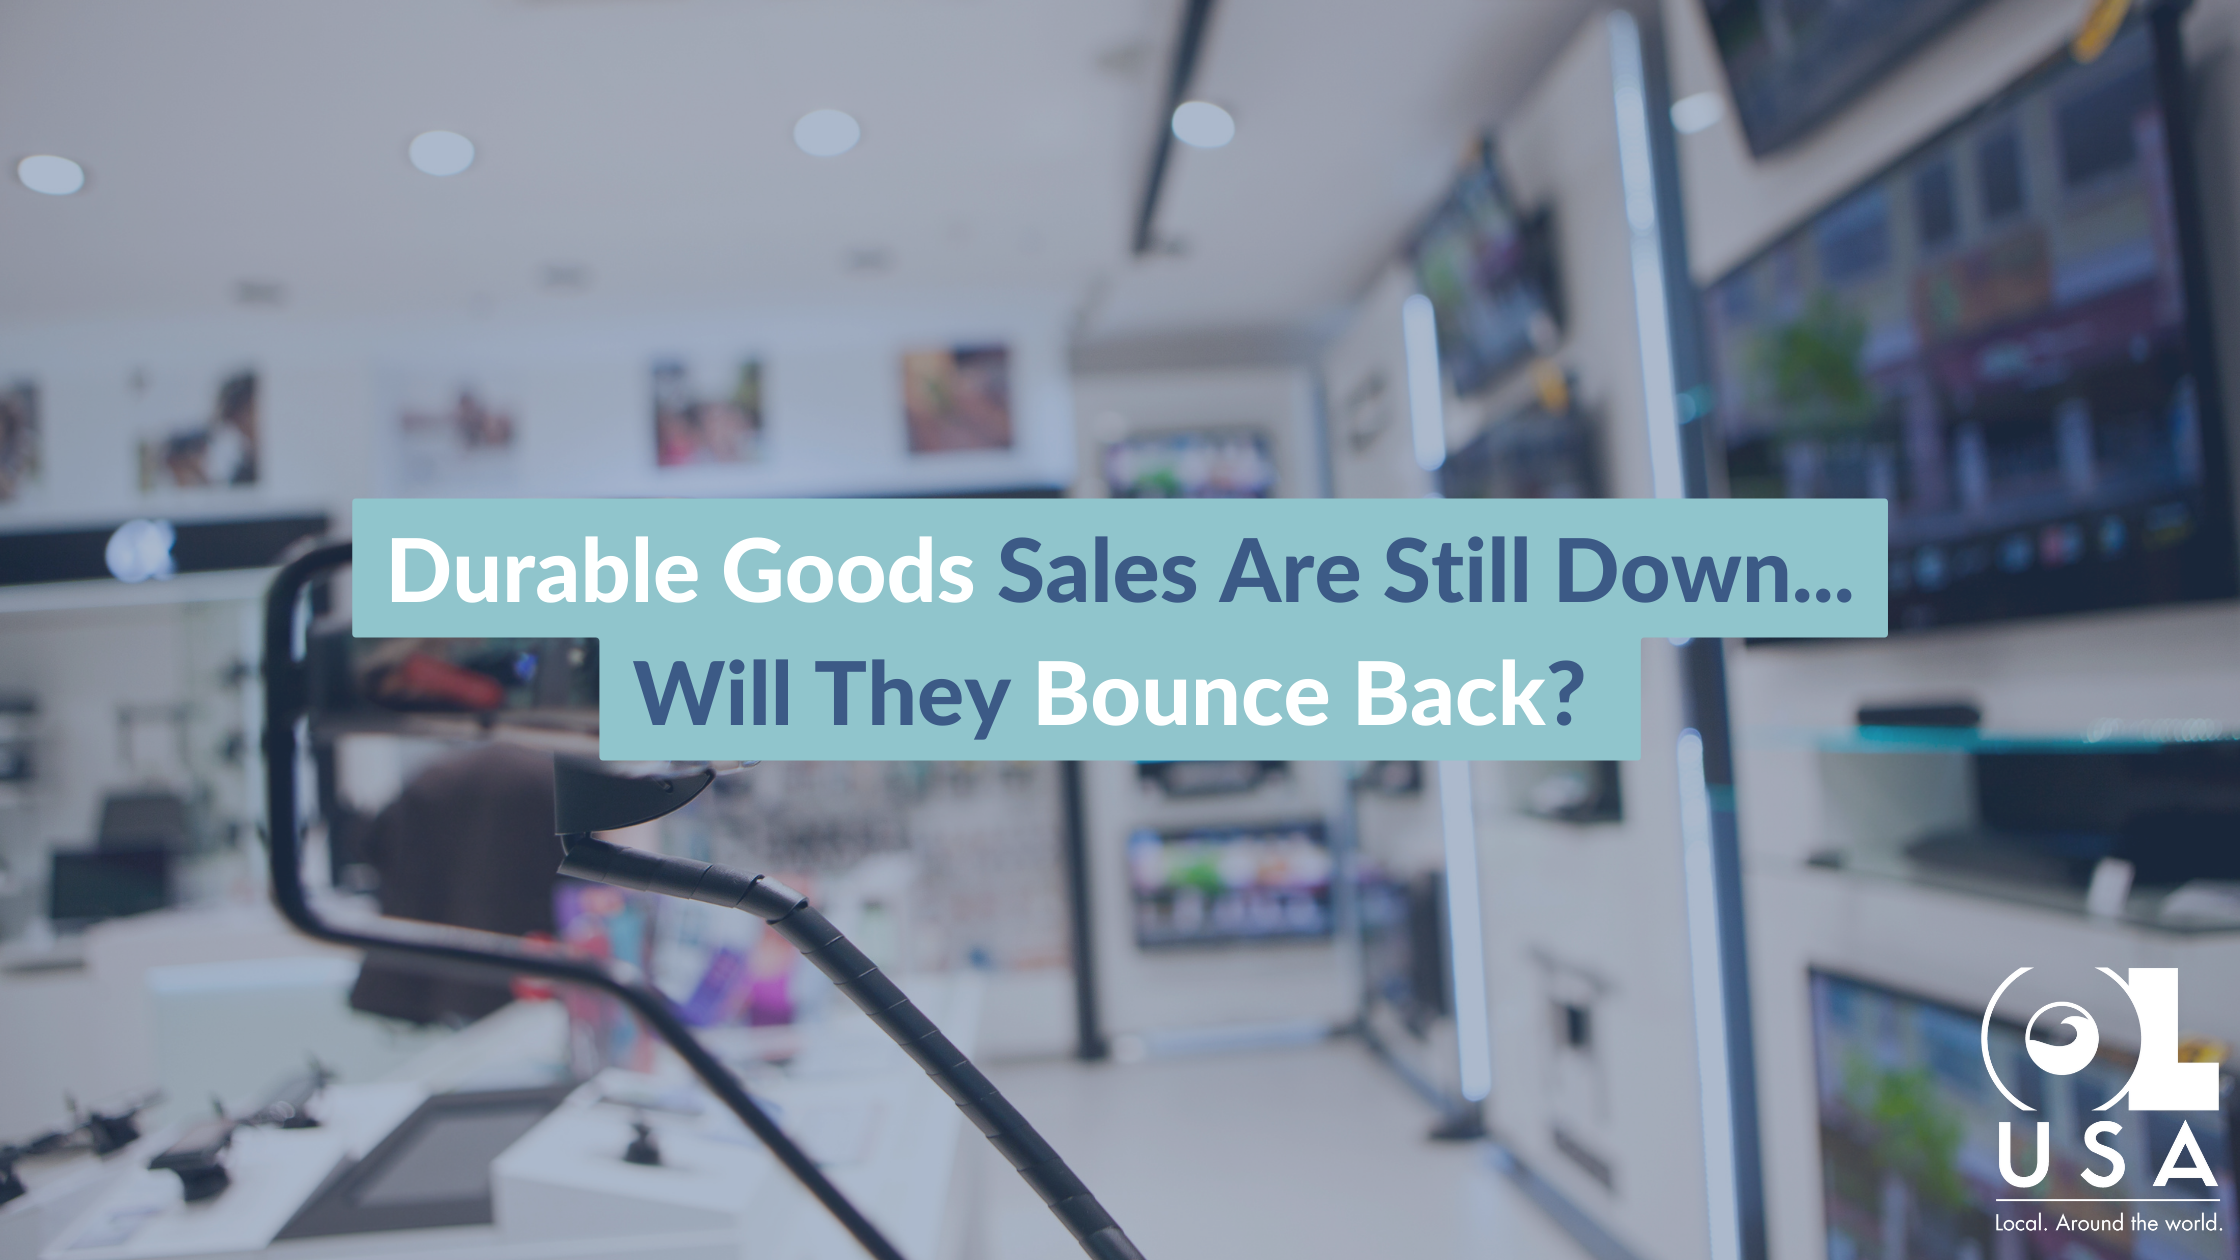 durable-goods-sales-are-still-down-will-they-bounce-back-ol-usa